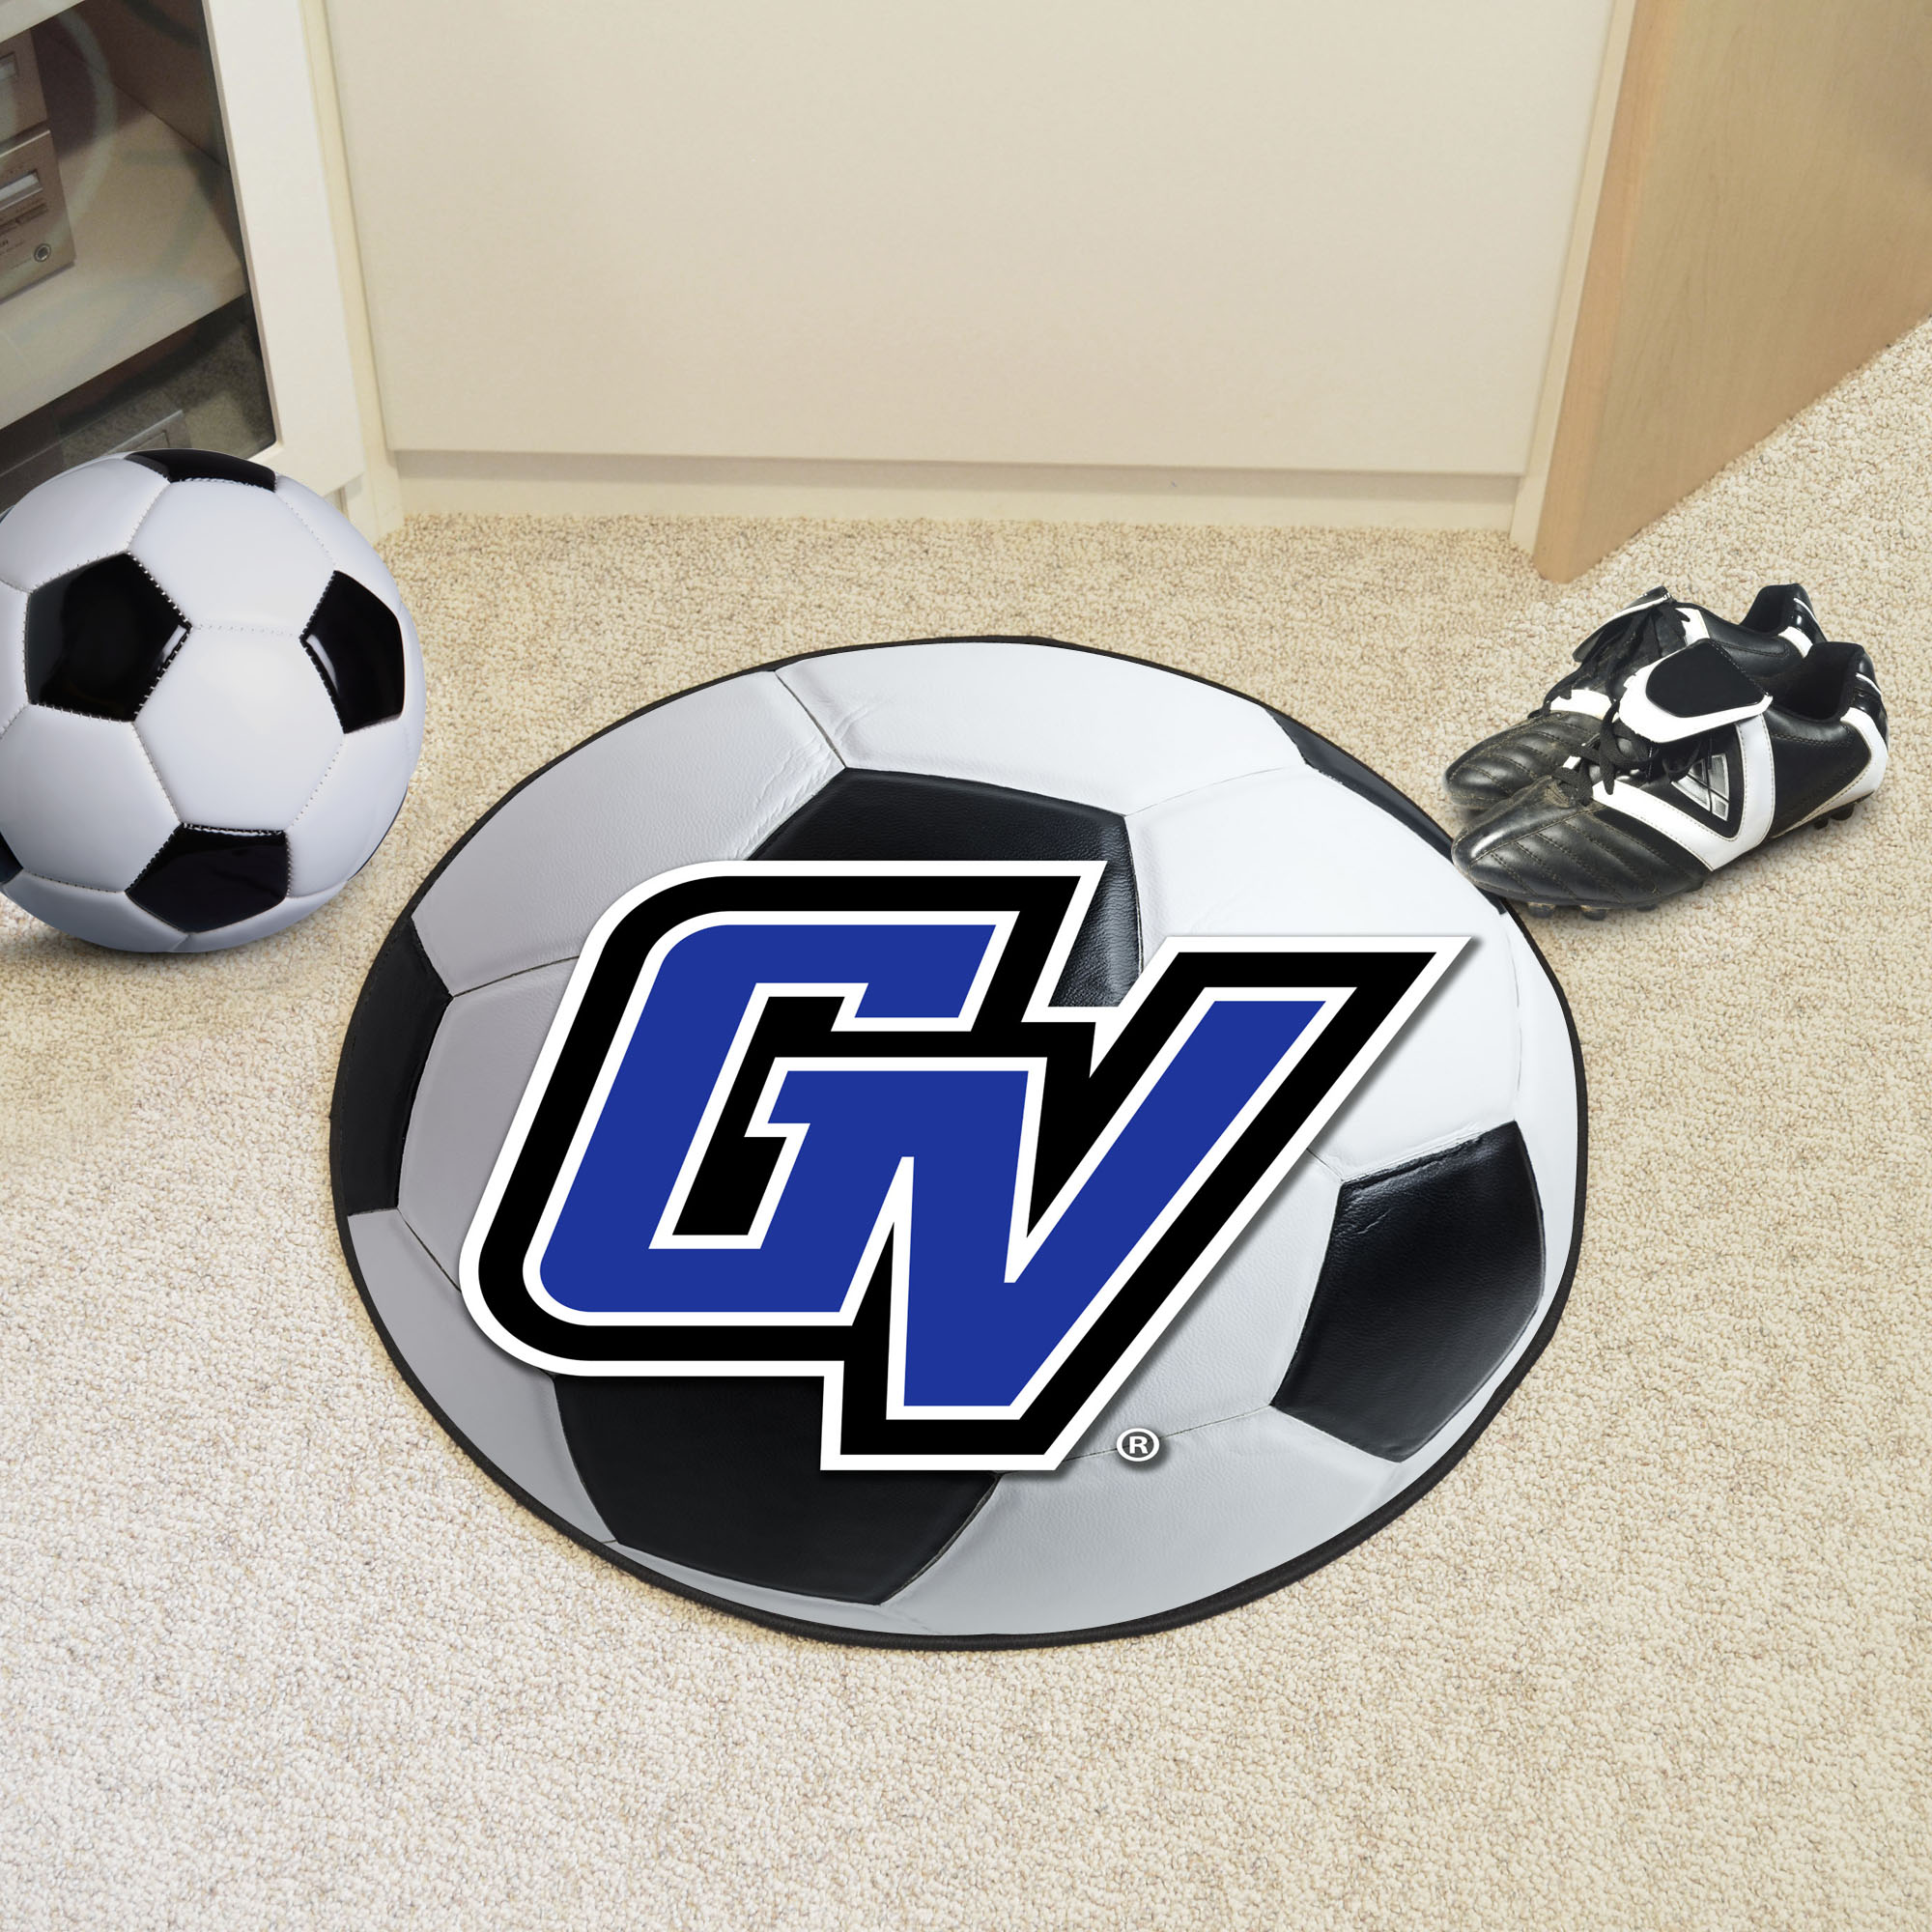 Grand Valley State University Ball Shaped Area Rugs (Ball Shaped Area Rugs: Soccer Ball)